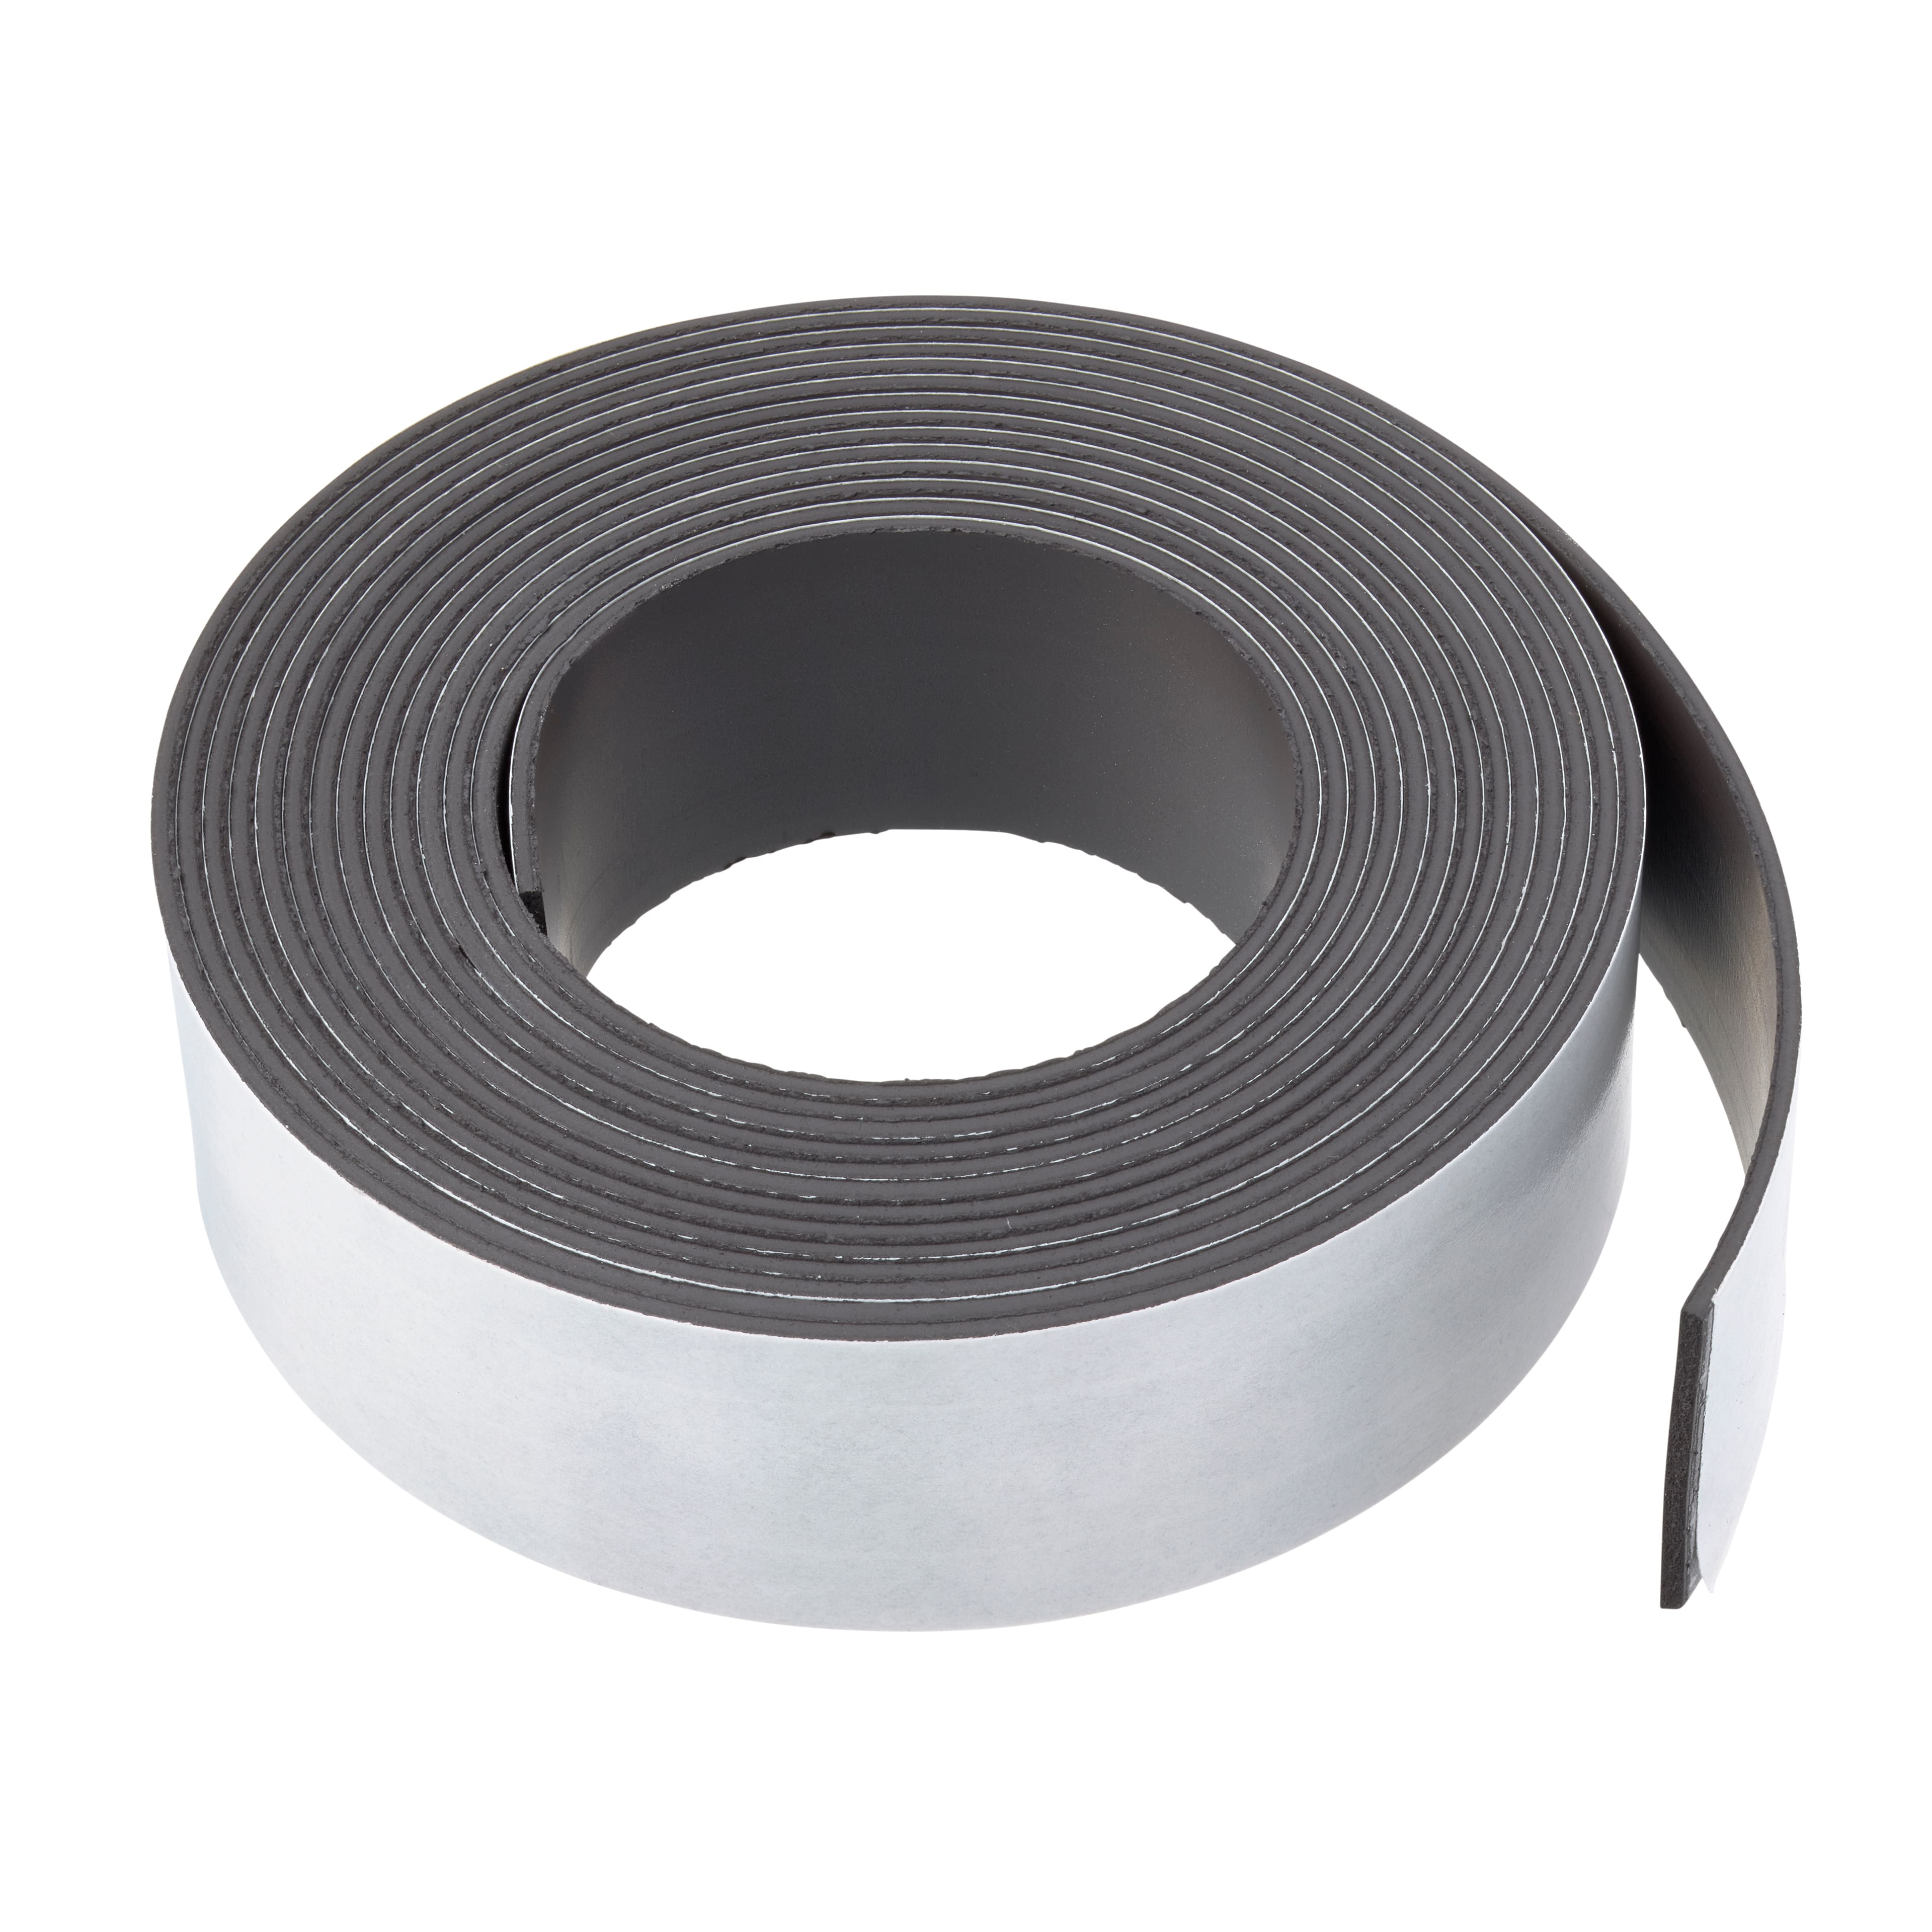 Pro MAG® Magnetic Adhesive Strips, 1/2 x 4